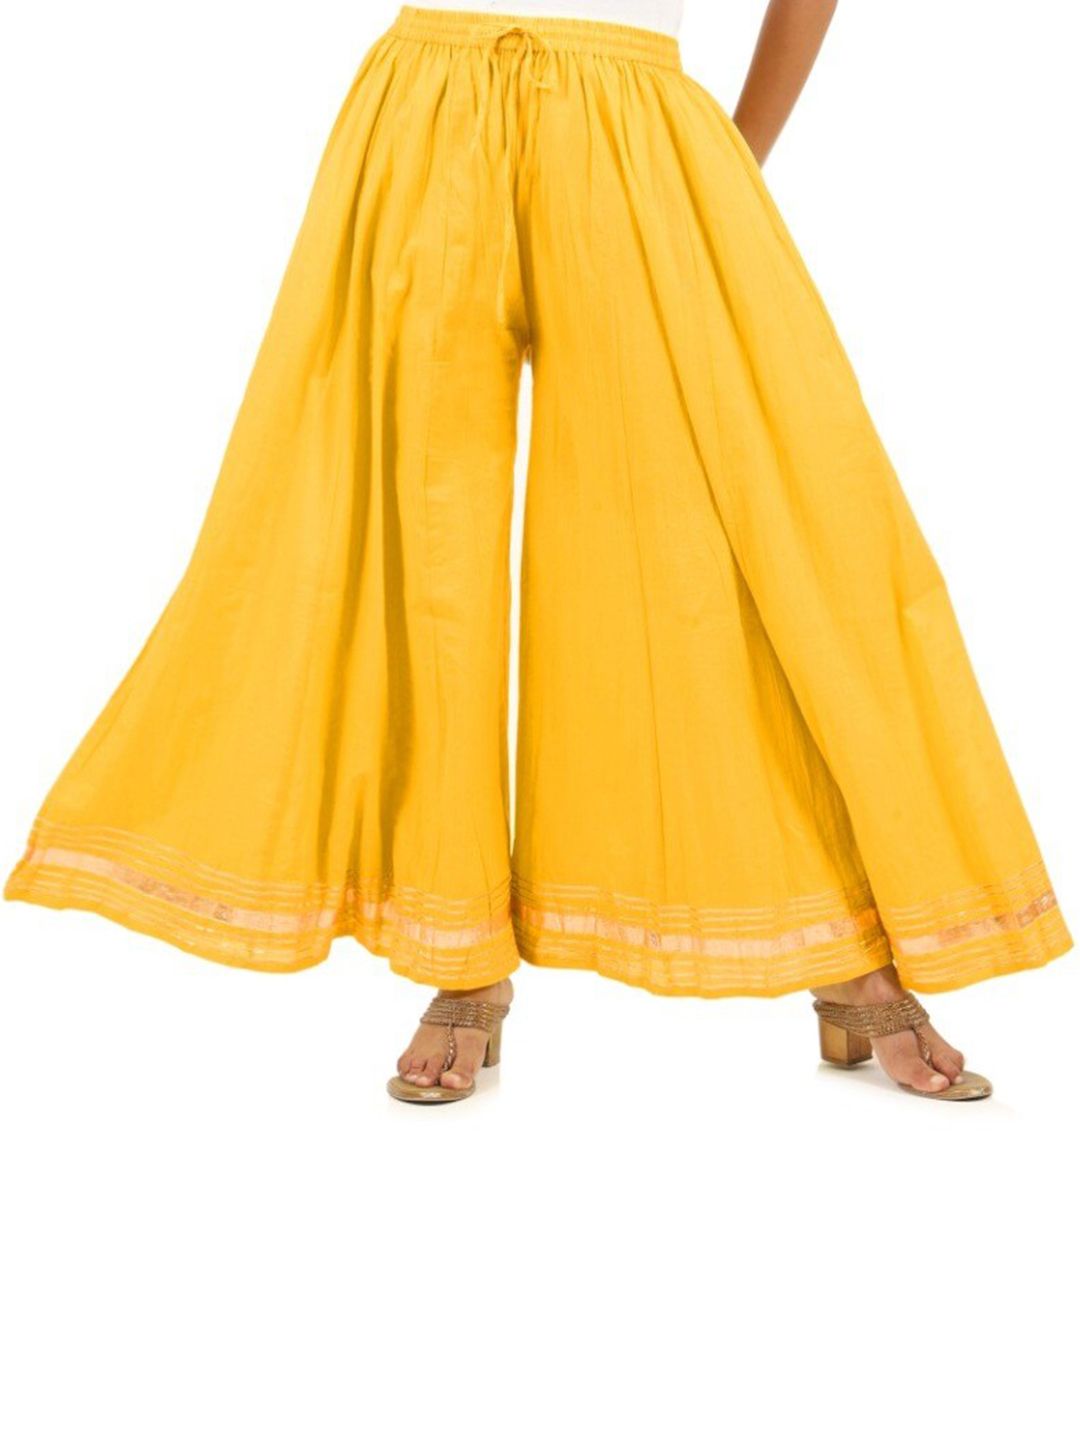 Swasti Women Yellow & Gold-Toned Printed Lace Cotton Ethnic Palazzos Price in India